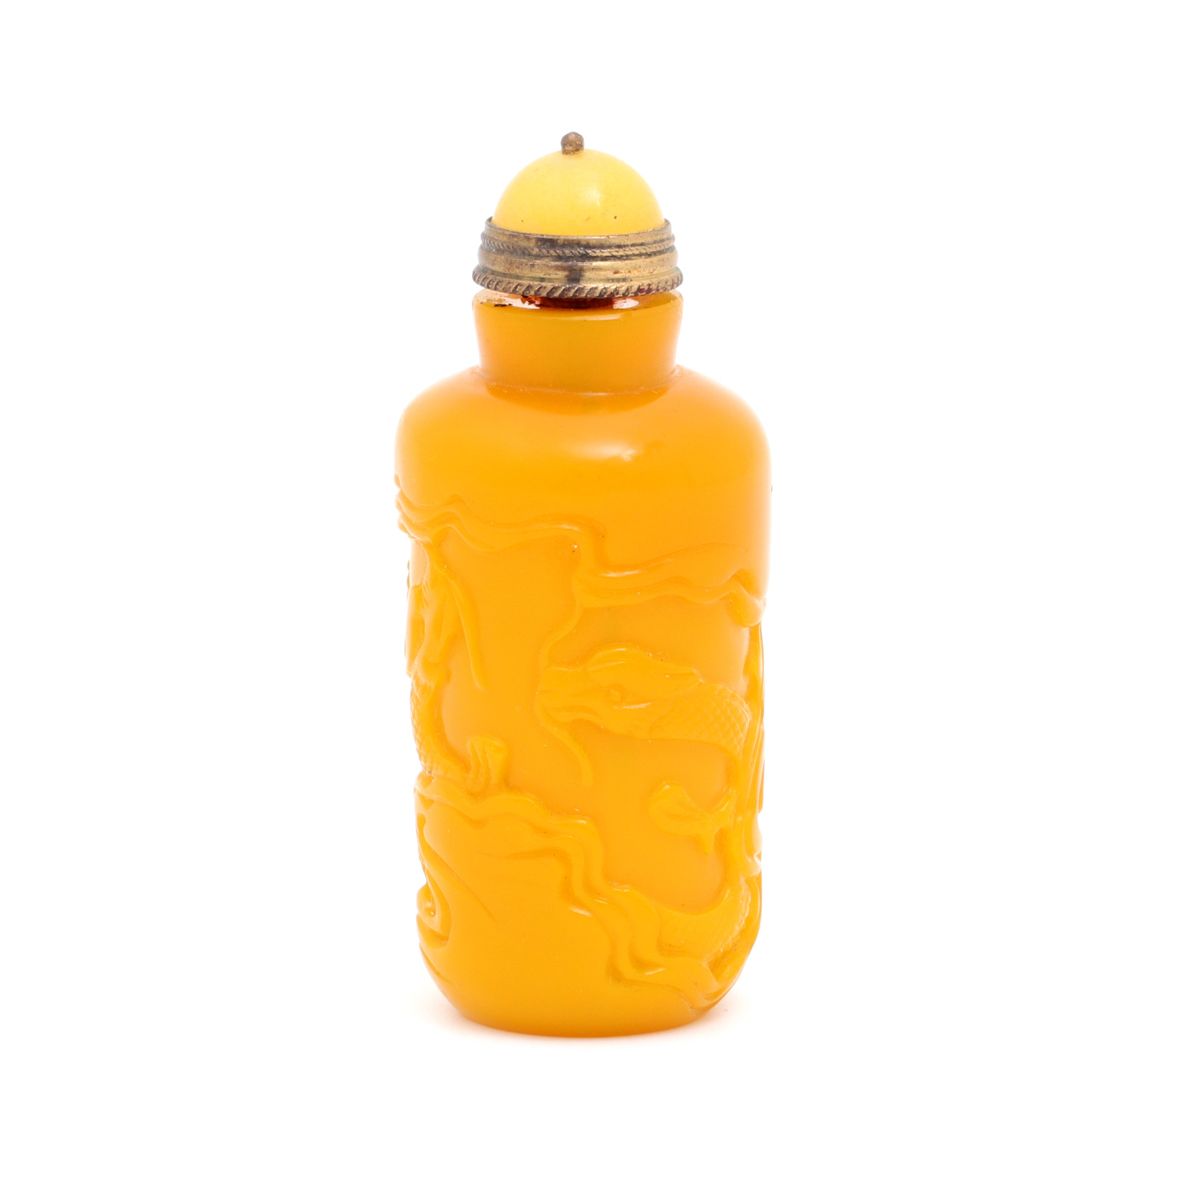 A SNUFF-BOTTLE A SNUFF-BOTTLE Yellow Chinese glass, decoration in relief depicti&hellip;